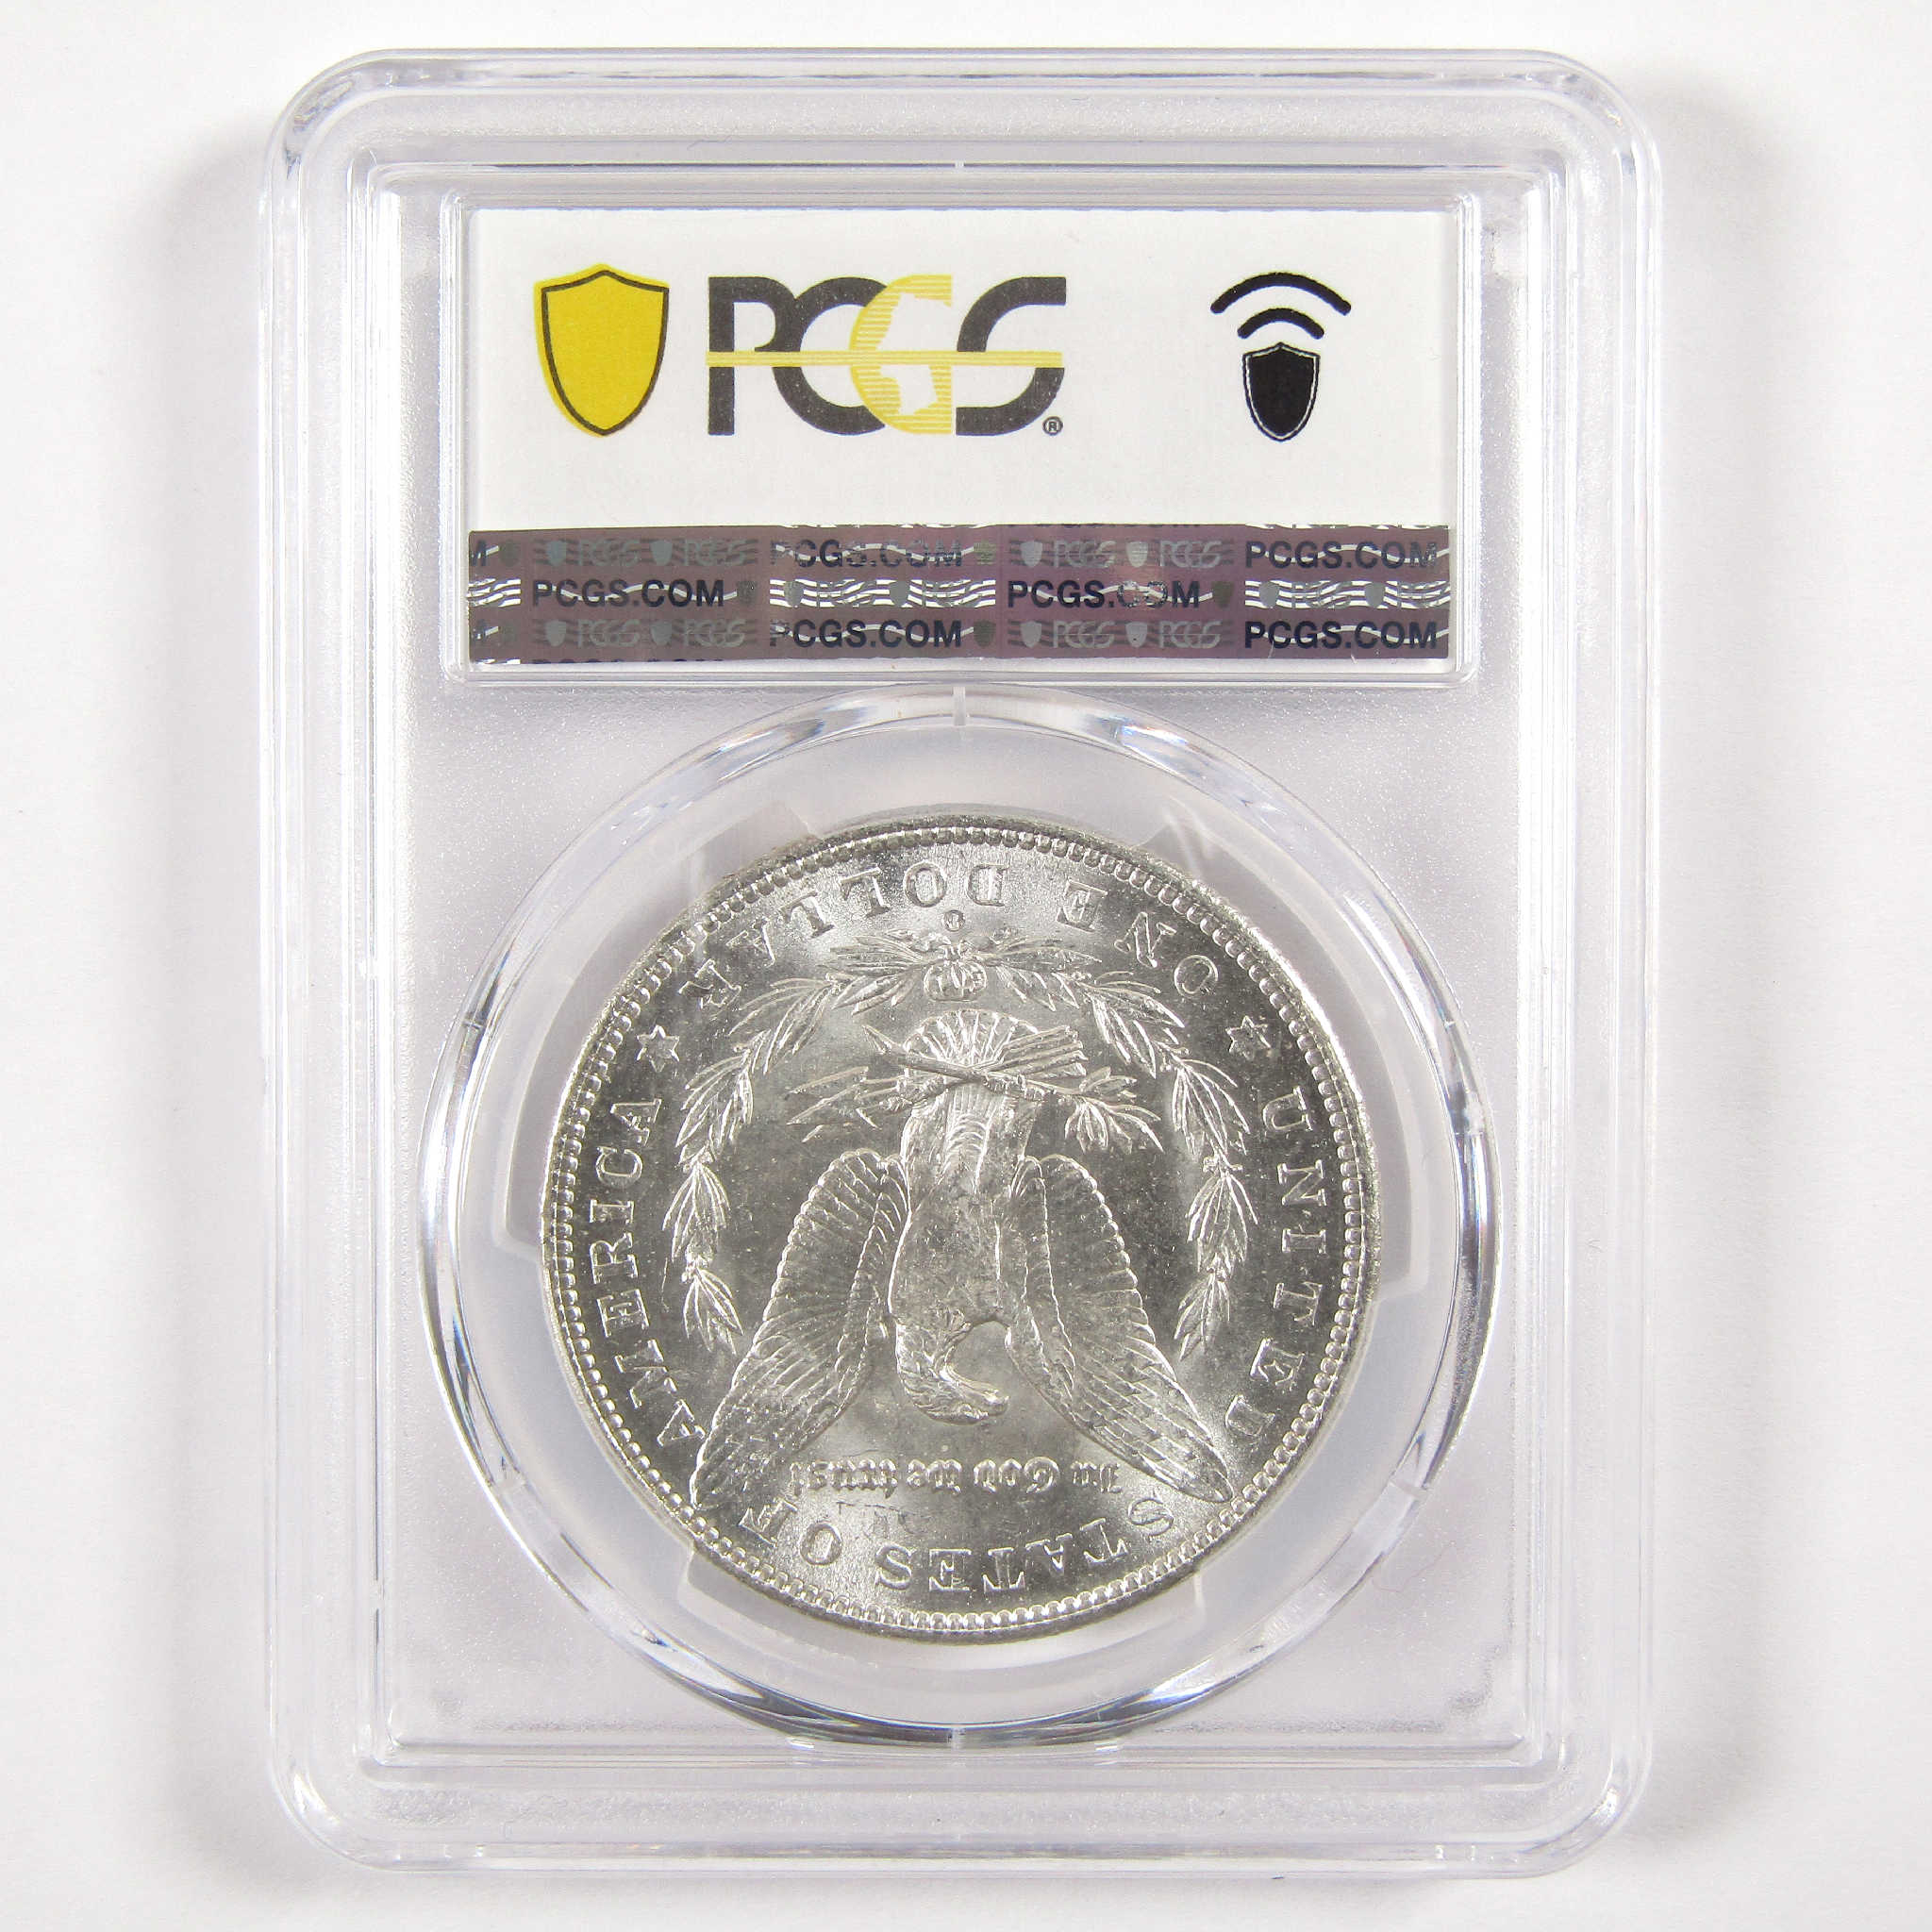 1902 O Morgan Dollar MS 64 PCGS Silver $1 Uncirculated Coin SKU:I11608 - Morgan coin - Morgan silver dollar - Morgan silver dollar for sale - Profile Coins &amp; Collectibles